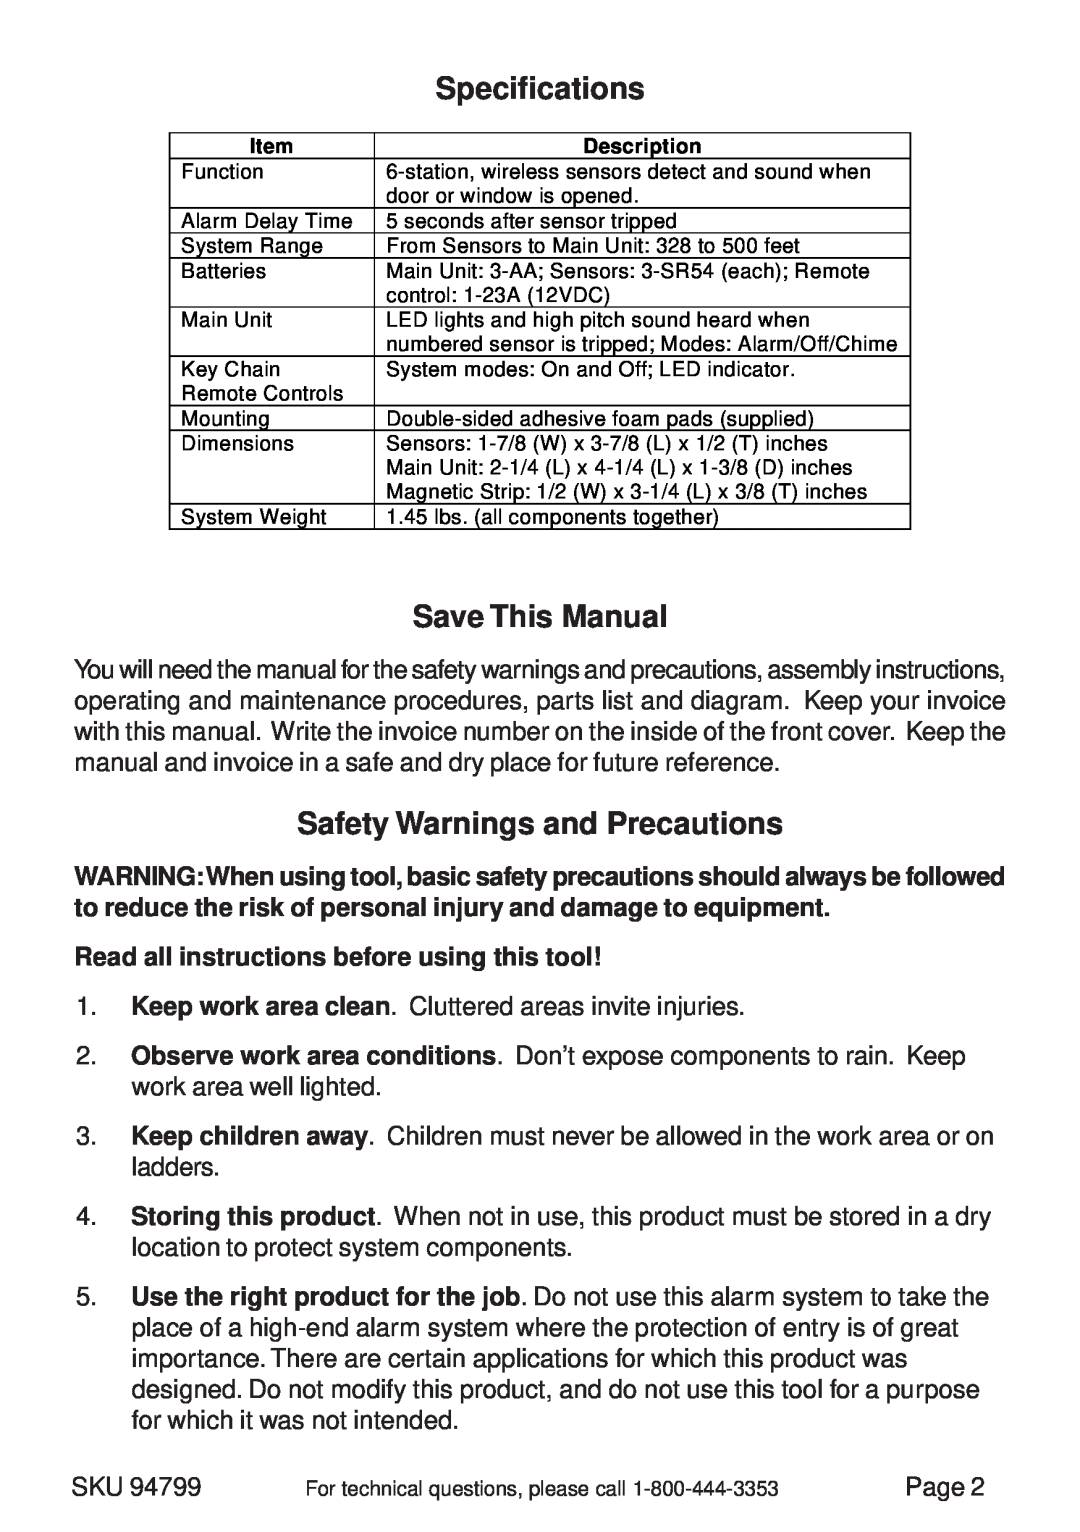 Harbor Freight Tools 94799 manual Specifications, Save This Manual, Safety Warnings and Precautions 